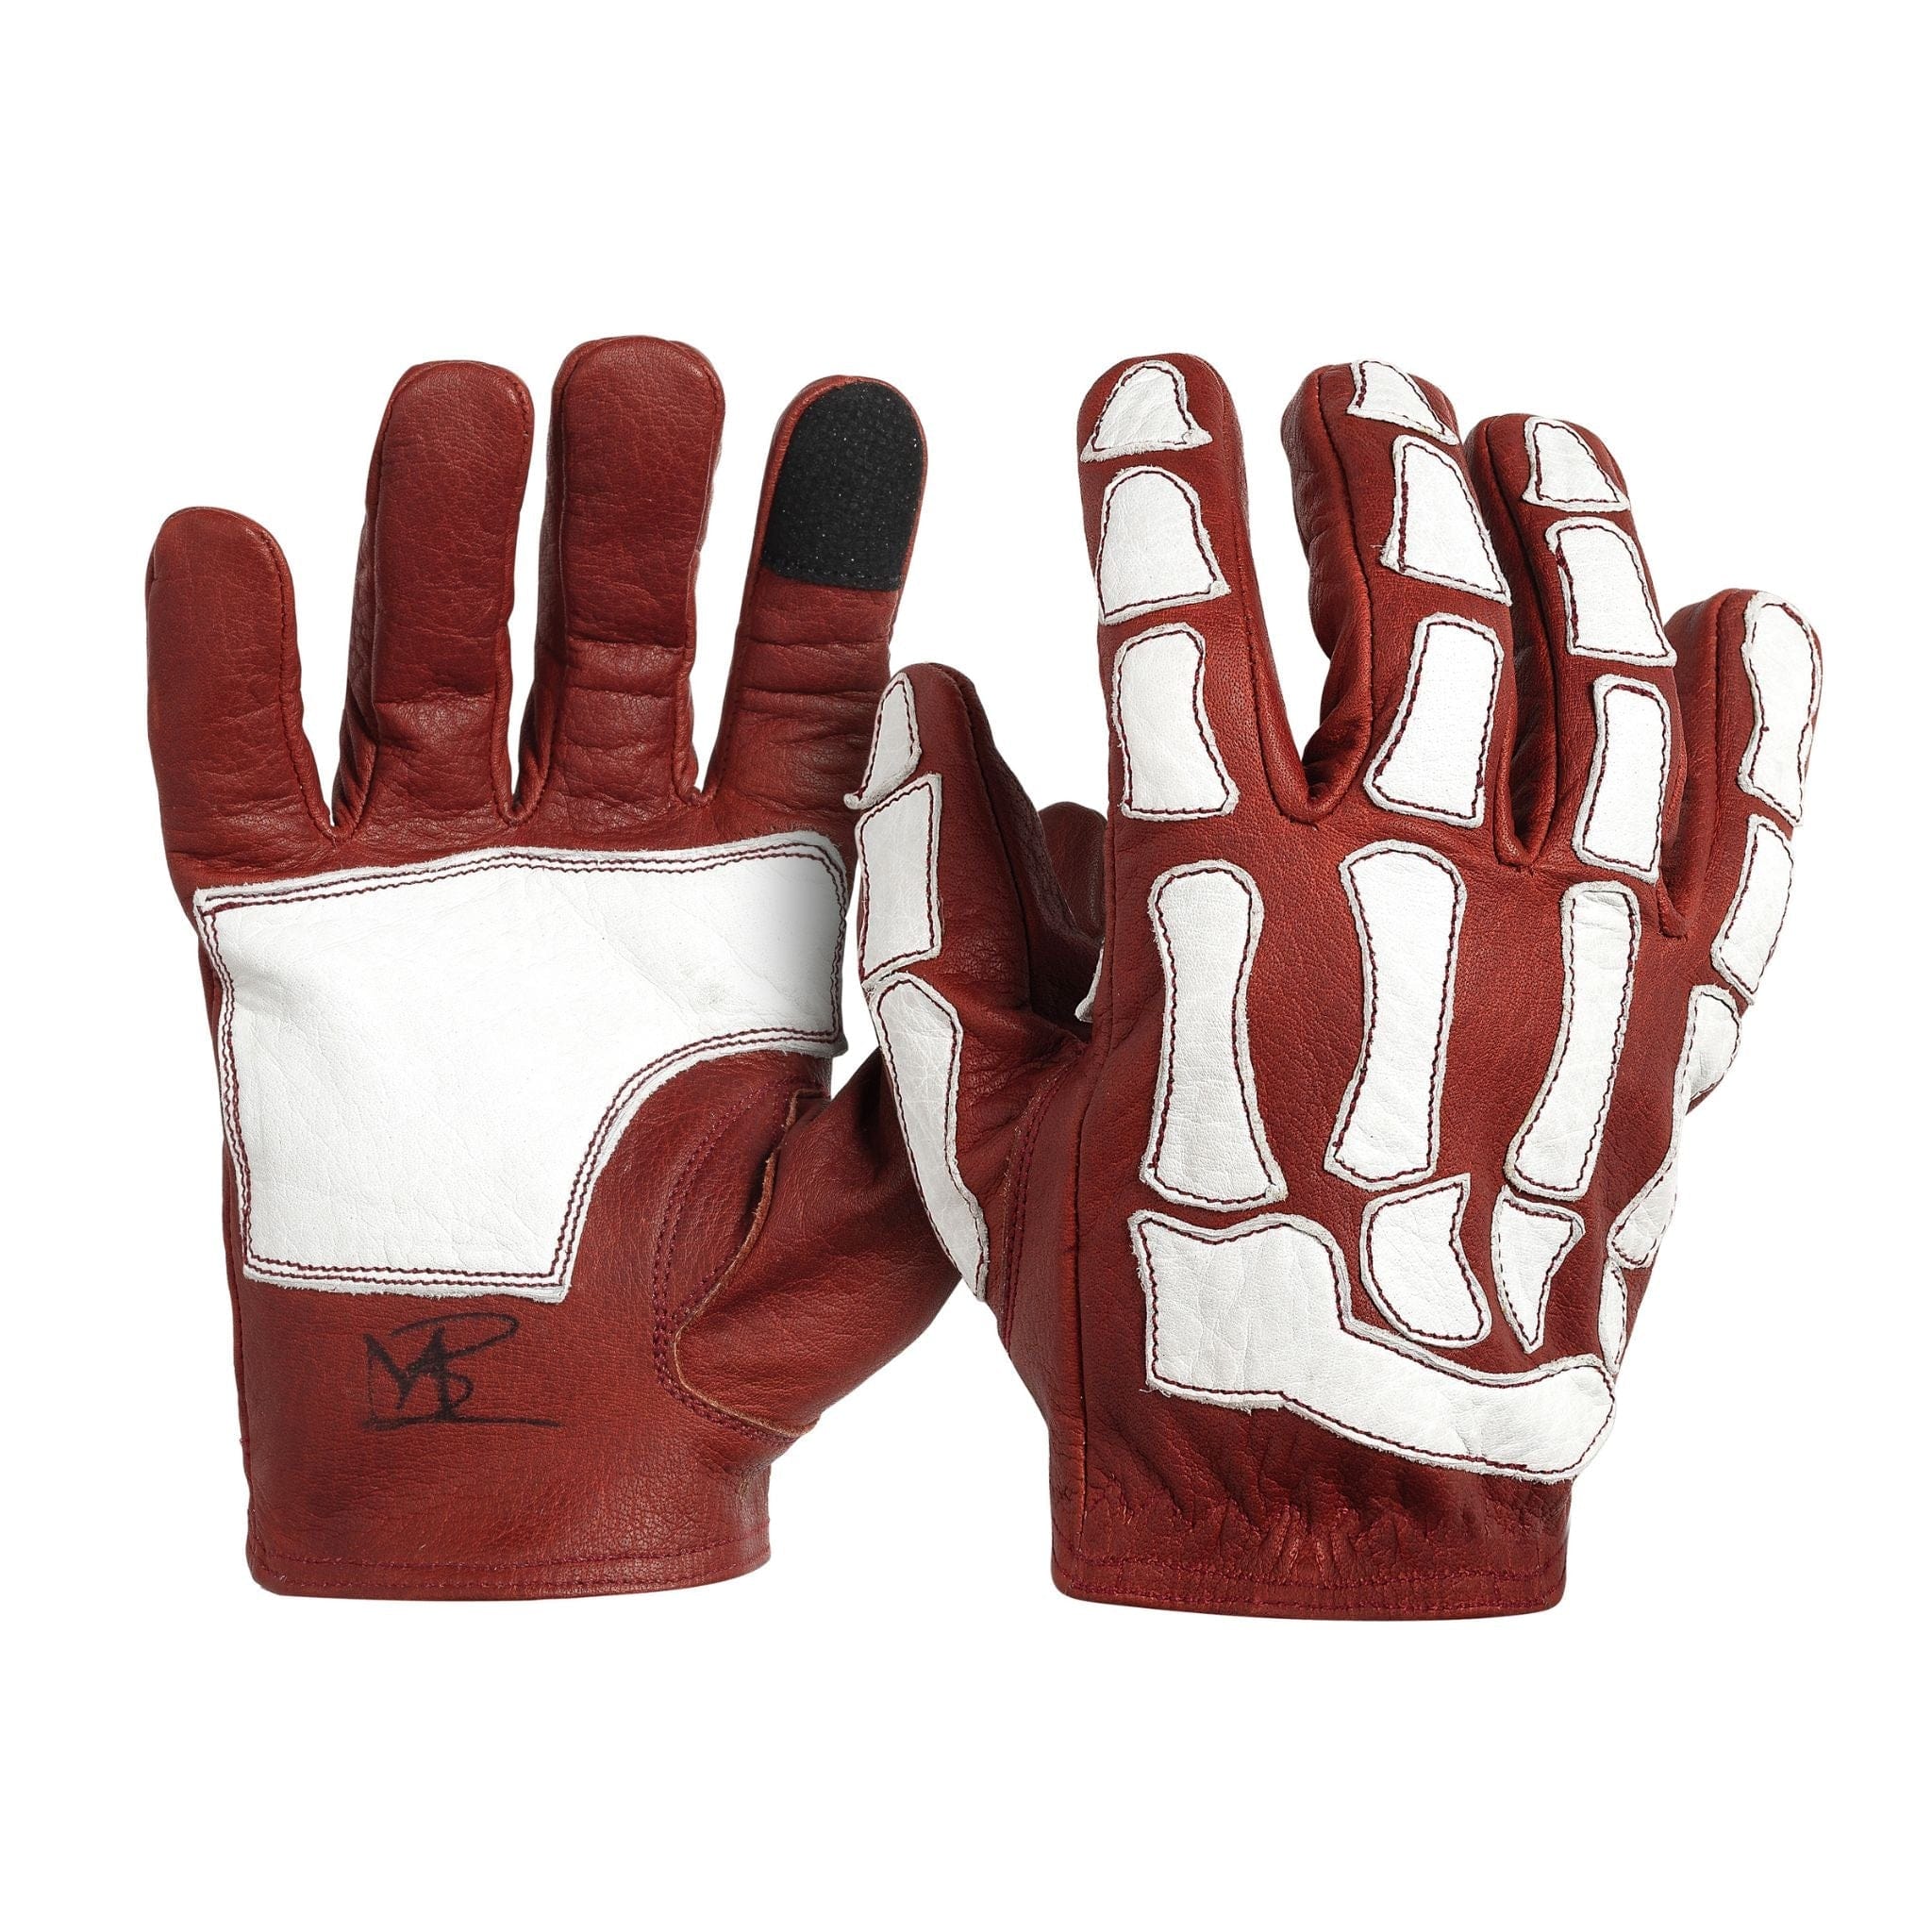 Skeleton Leather Motorcycle Gloves - Red-White - Russell's Western 